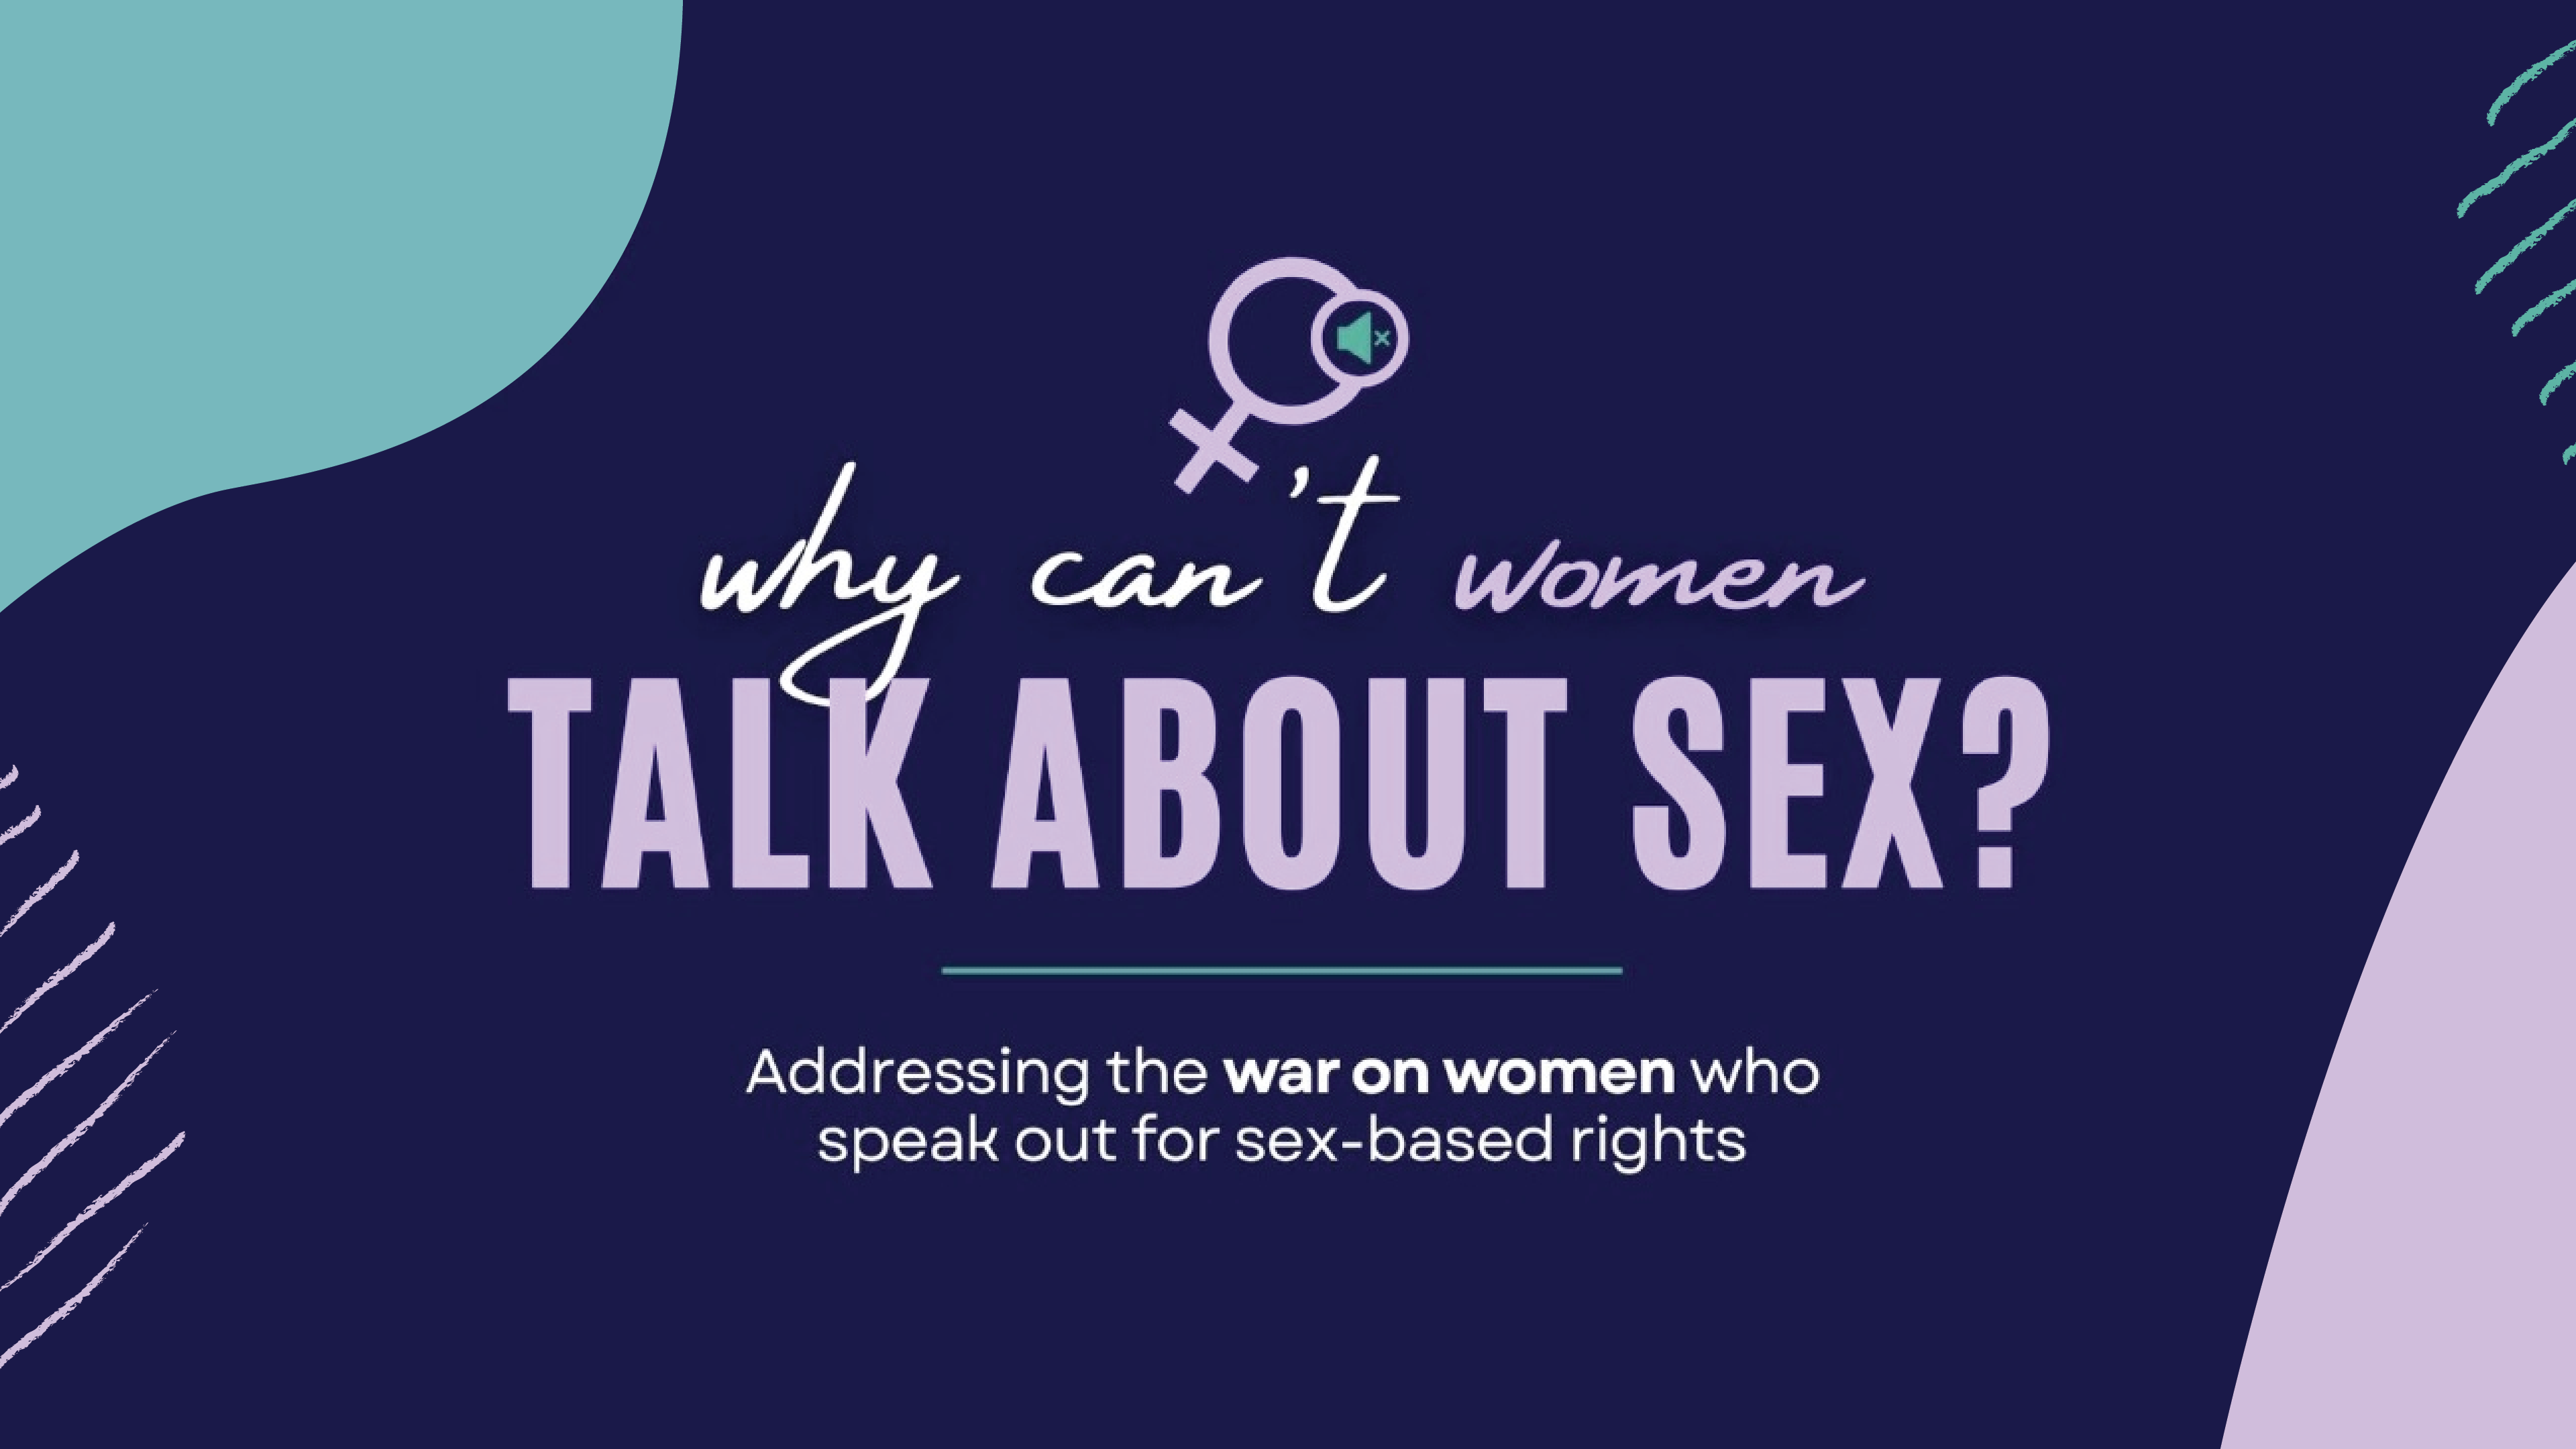 Why Can’t women talk about sex? | Canberra Parliament House